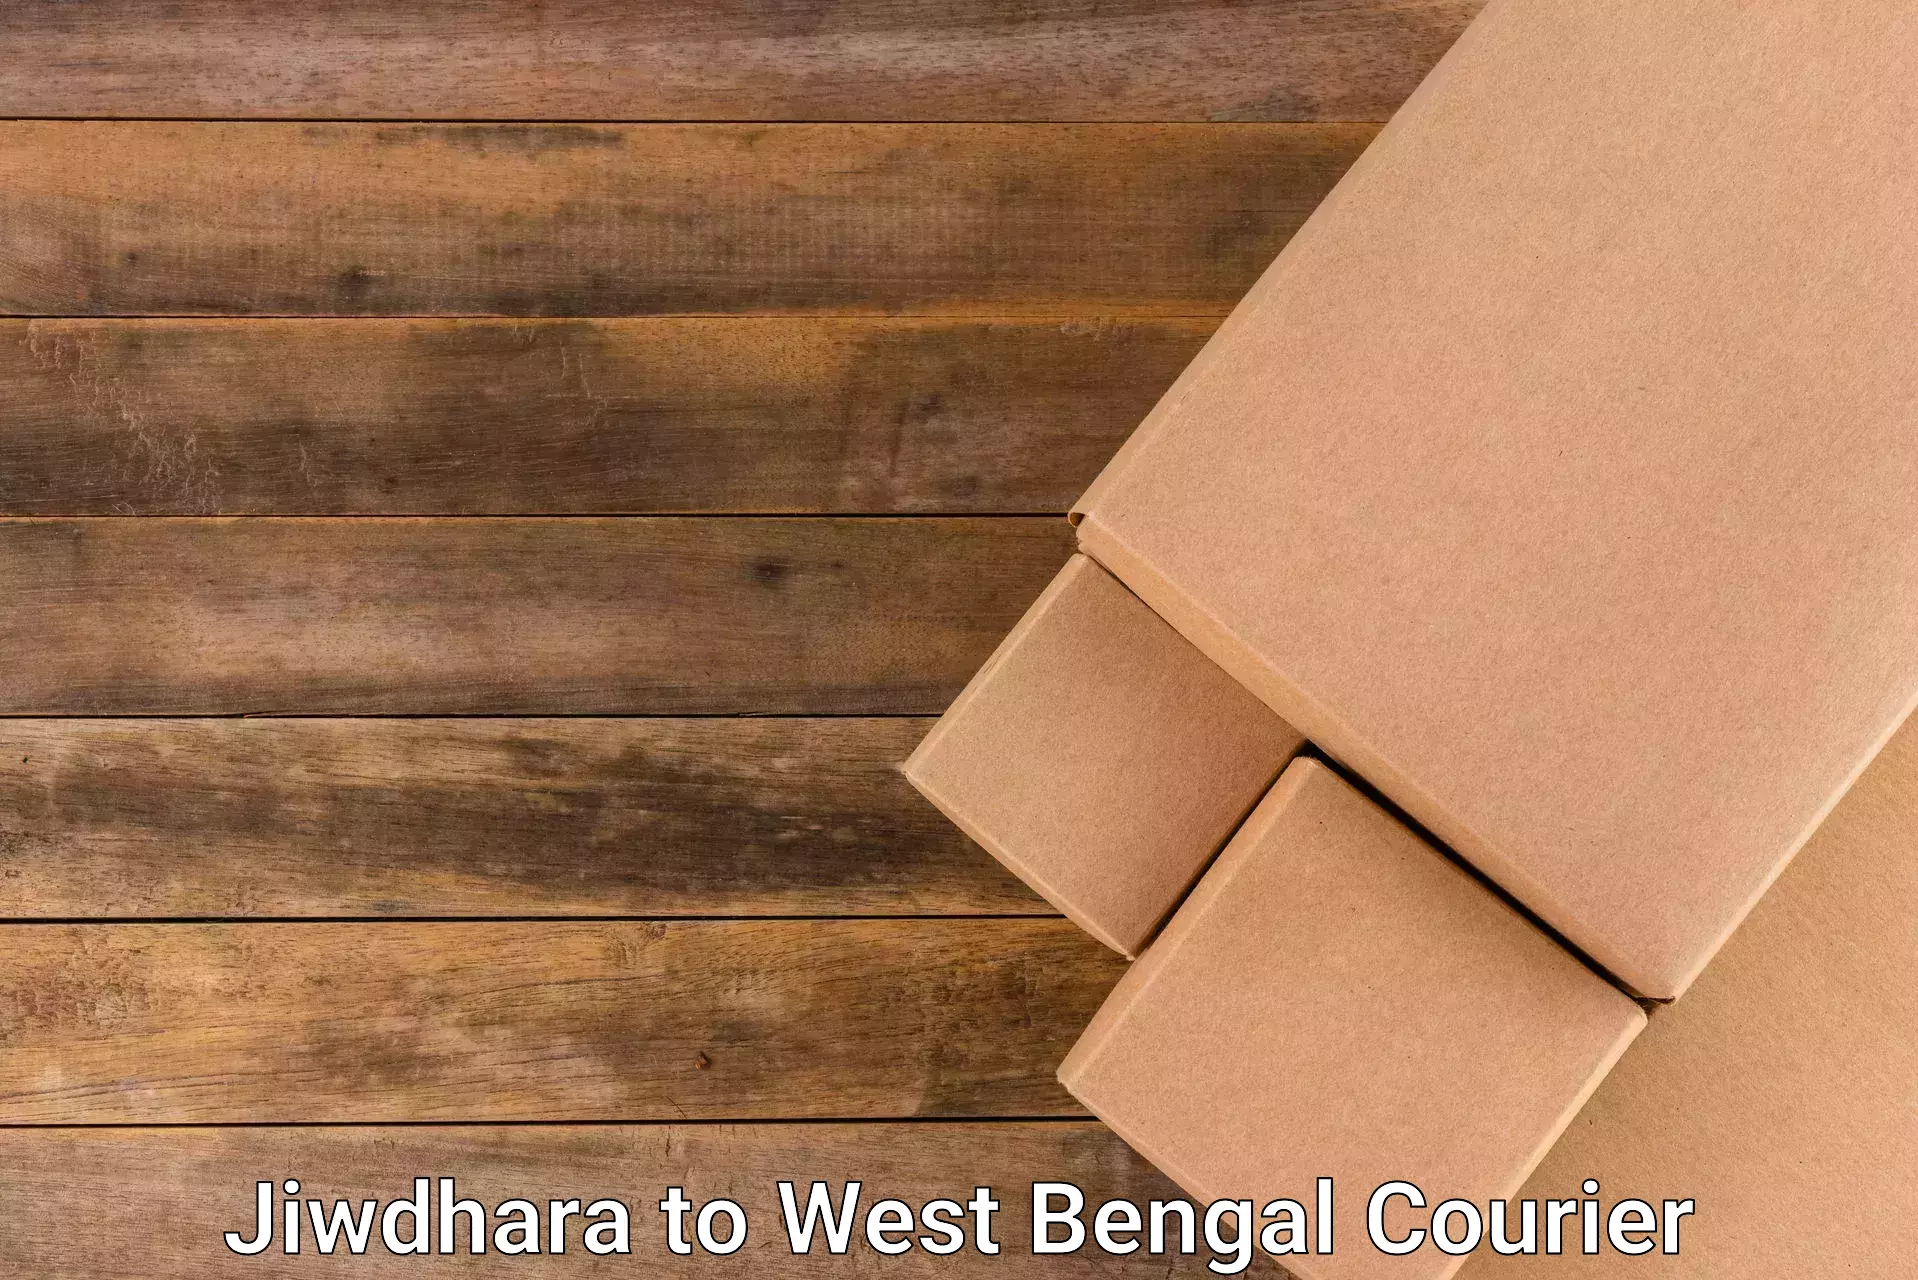 Courier service innovation Jiwdhara to West Bengal